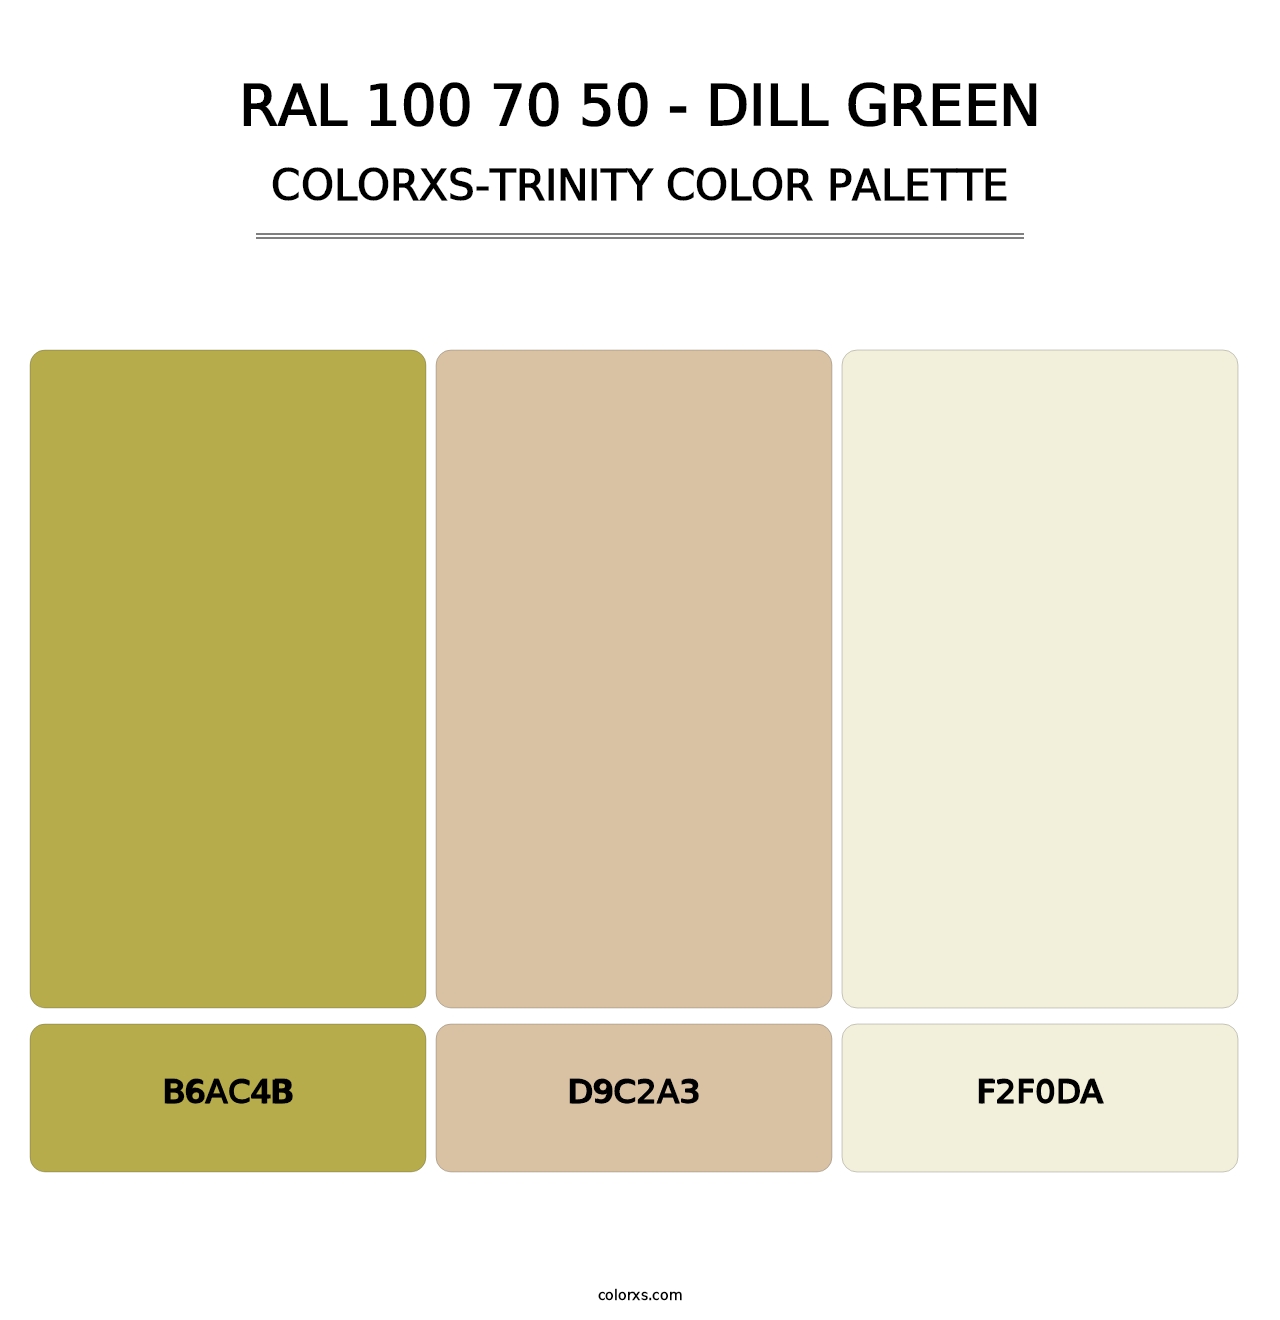 RAL 100 70 50 - Dill Green - Colorxs Trinity Palette